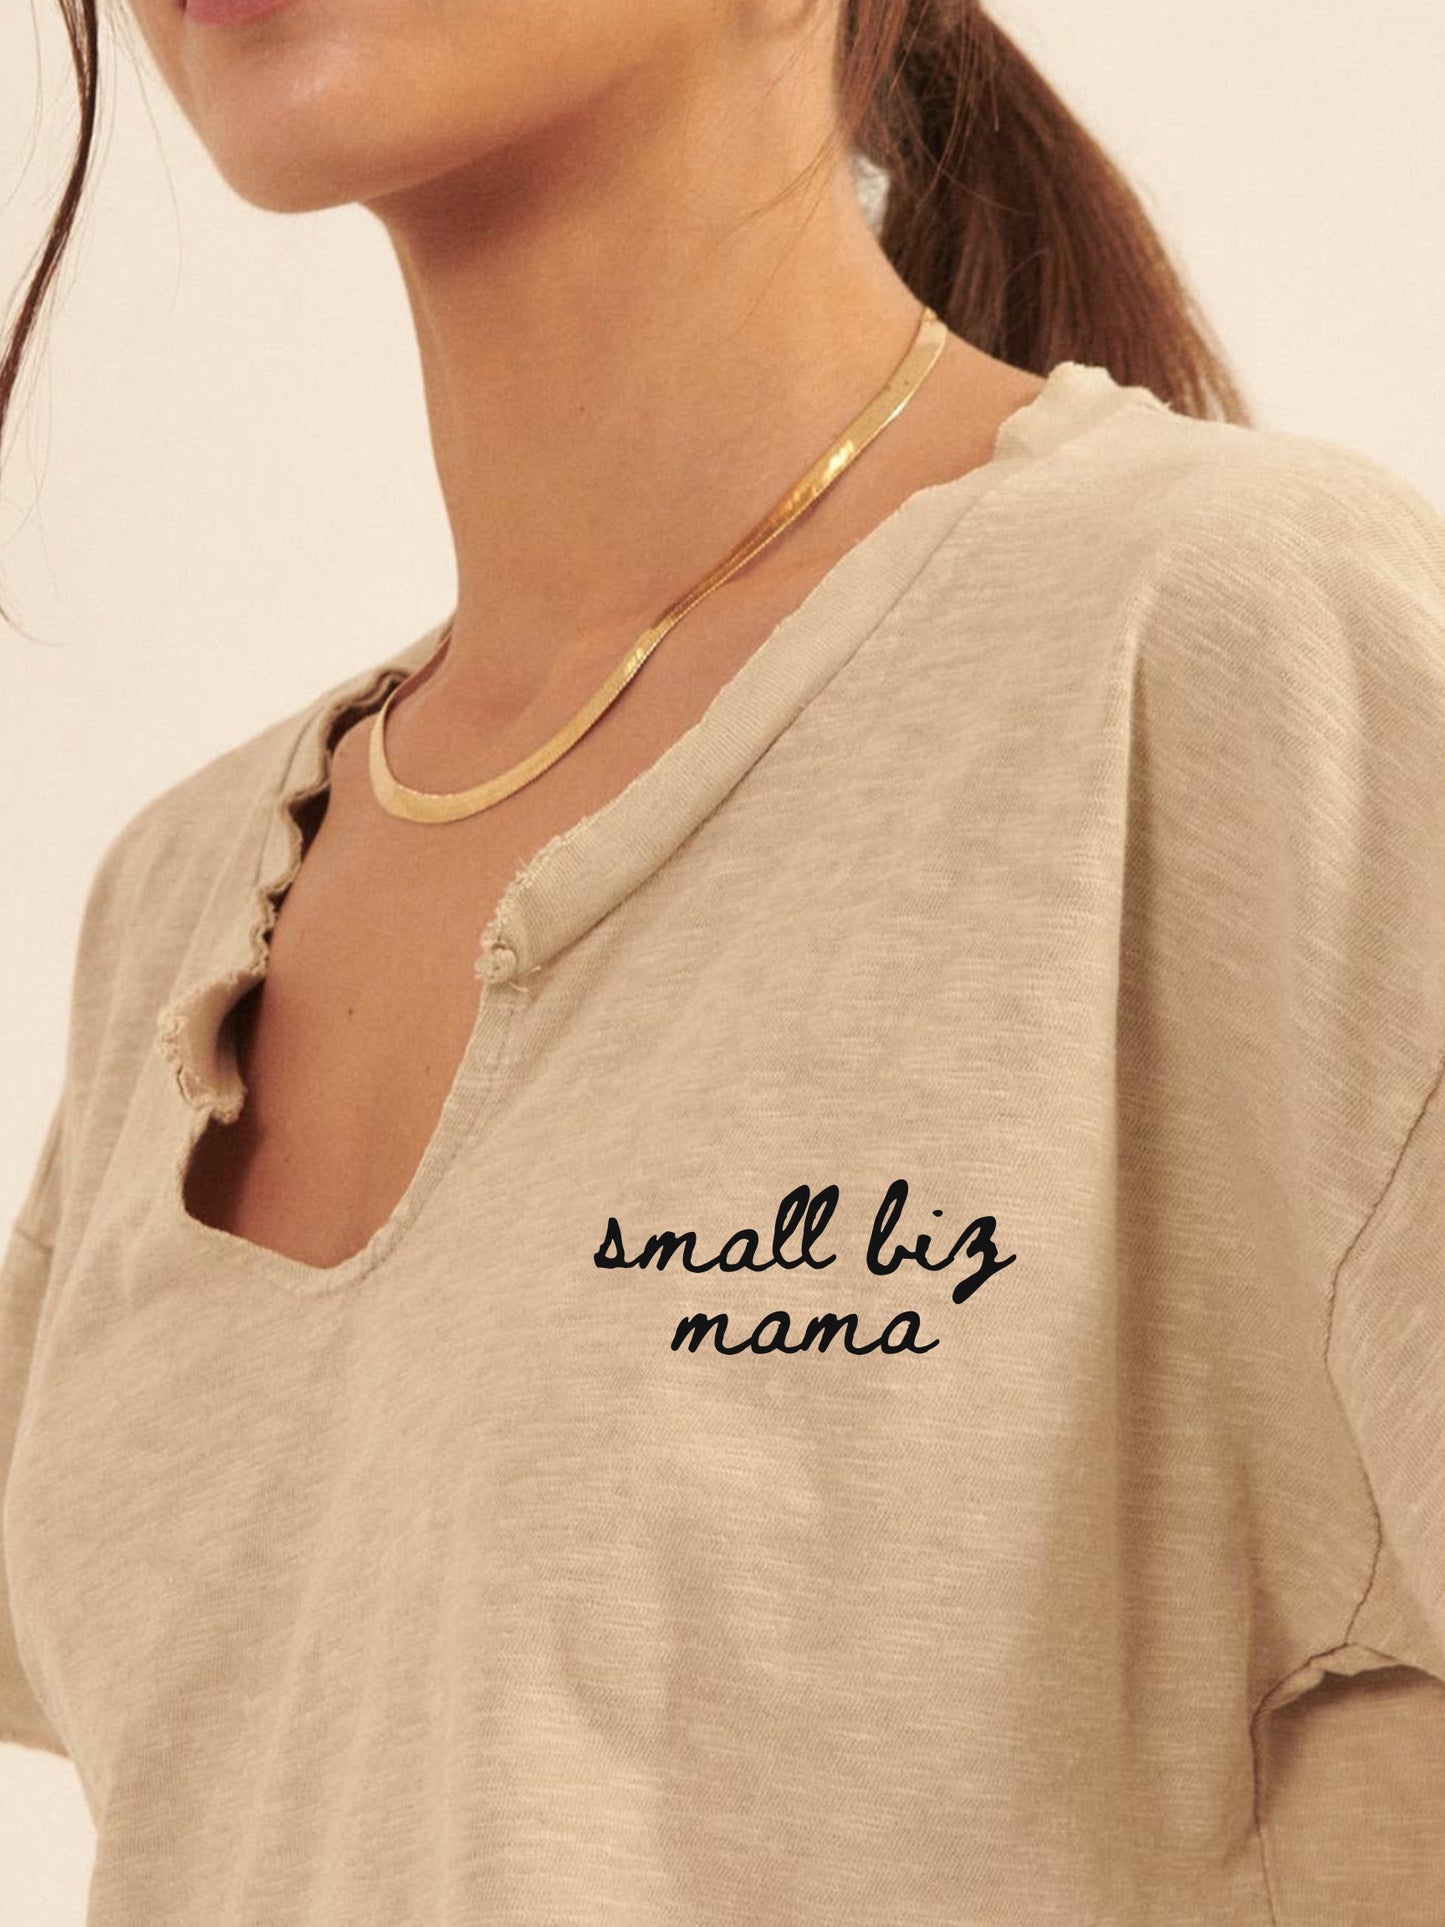 embroidered small biz mama cropped tee - stone